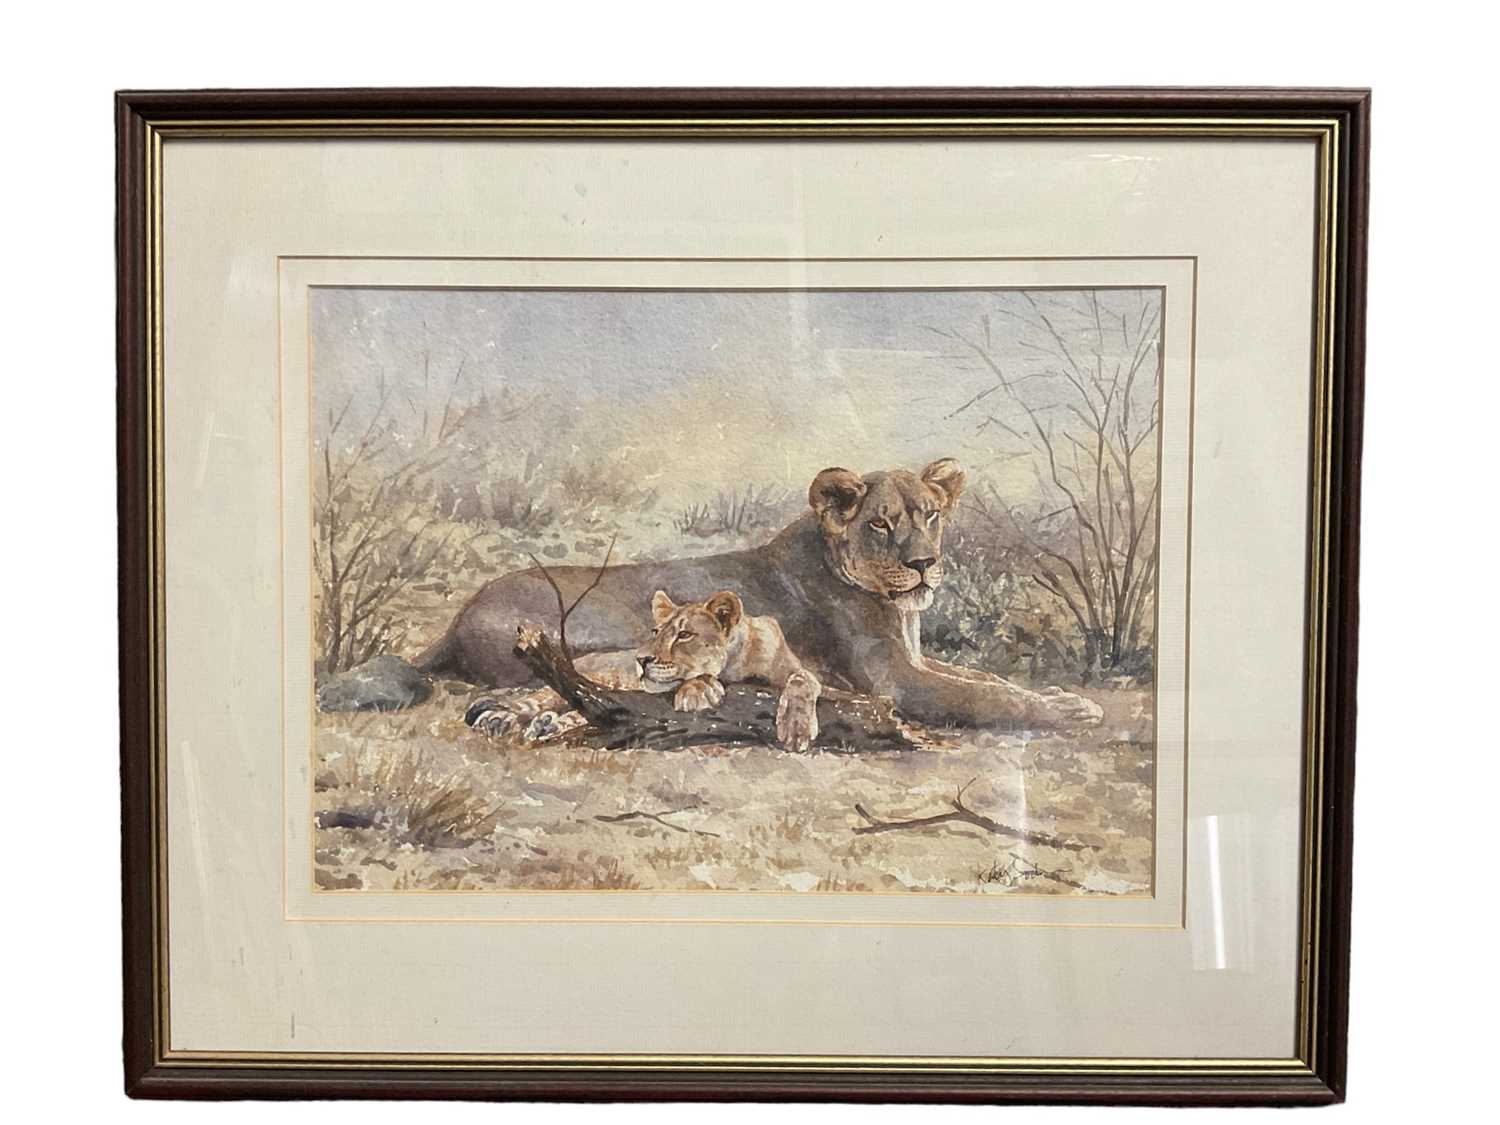 Katy Sodgan (contemporary) watercolour, set of four African wildlife scenes, signed, glazed frames